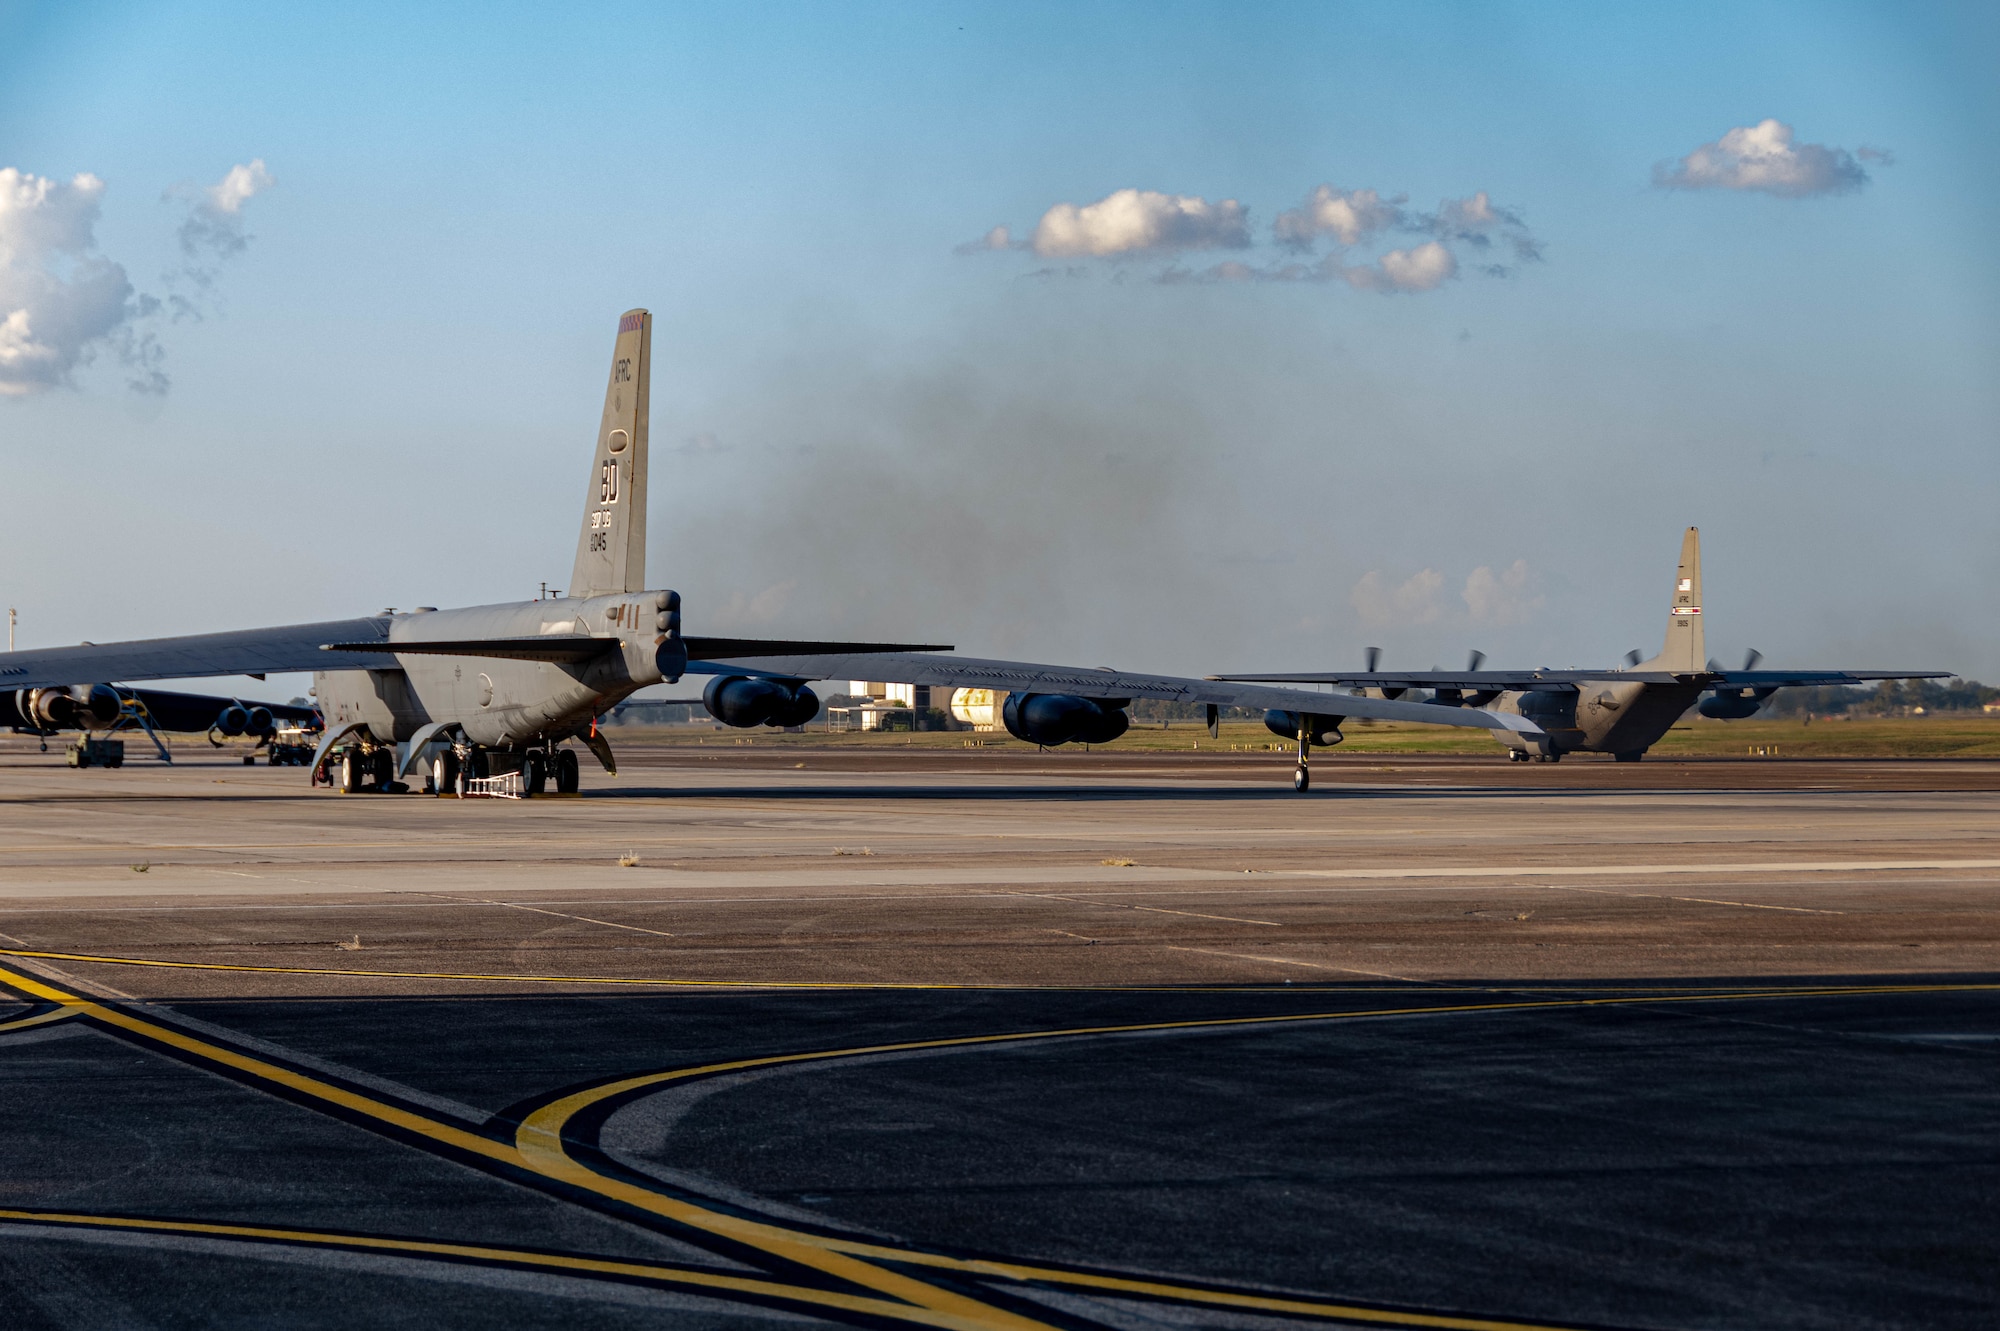 A U.S. Air Force Reserve C-130H Hercules aircraft assigned to the 910th Airlift Wing, based at Youngstown Air Reserve Station, Ohio and equipped with a Modular Aerial Spray System, taxis past a B-52 Stratofortress bomber prior to taking off at Barksdale Air Force Base, Louisiana, Oct. 22, 2020.